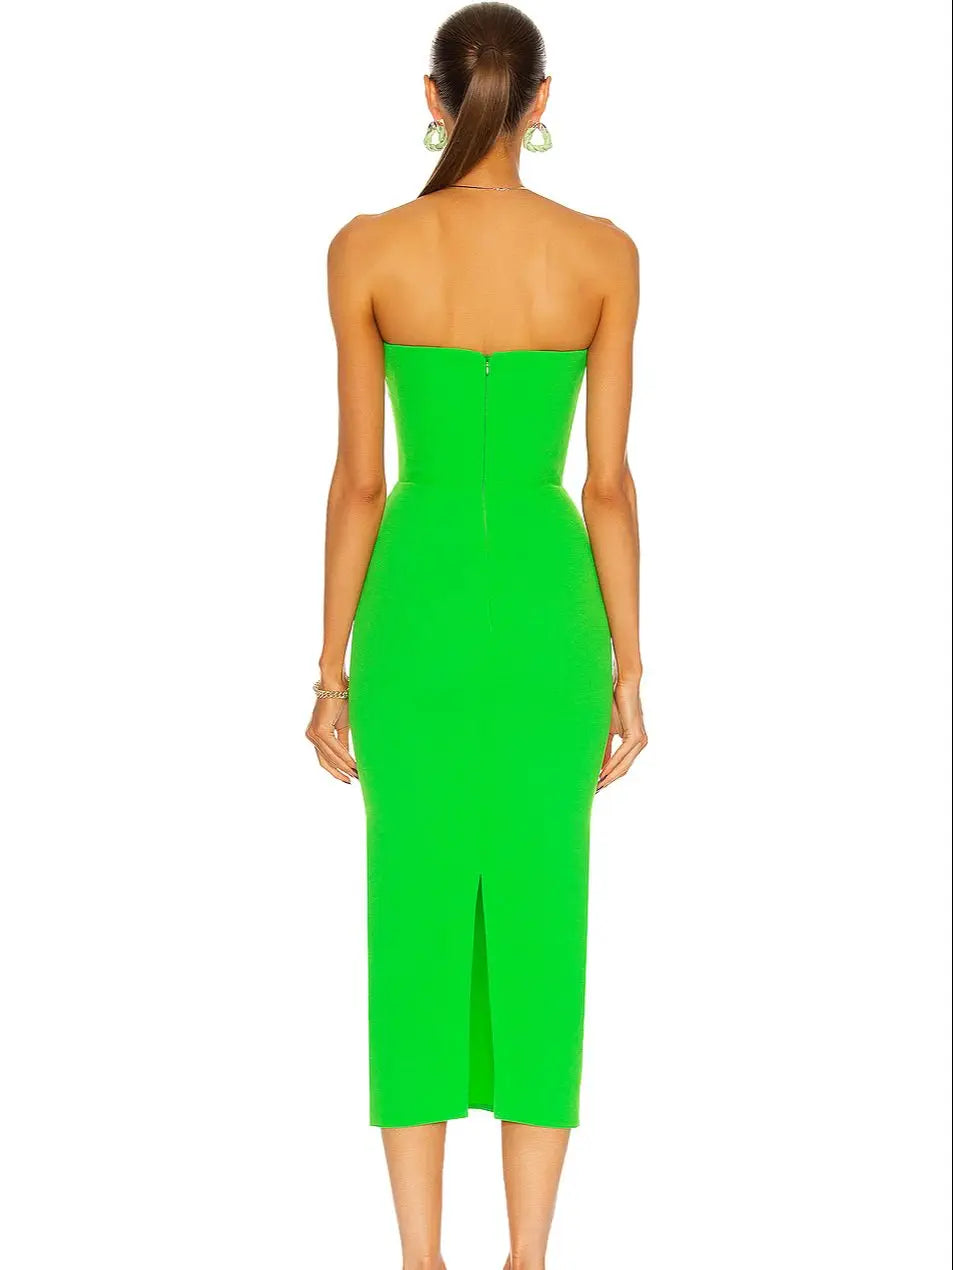 Neon Green Pink Strapless Bandage Dress Bodycon Club Party Dress by Canmol